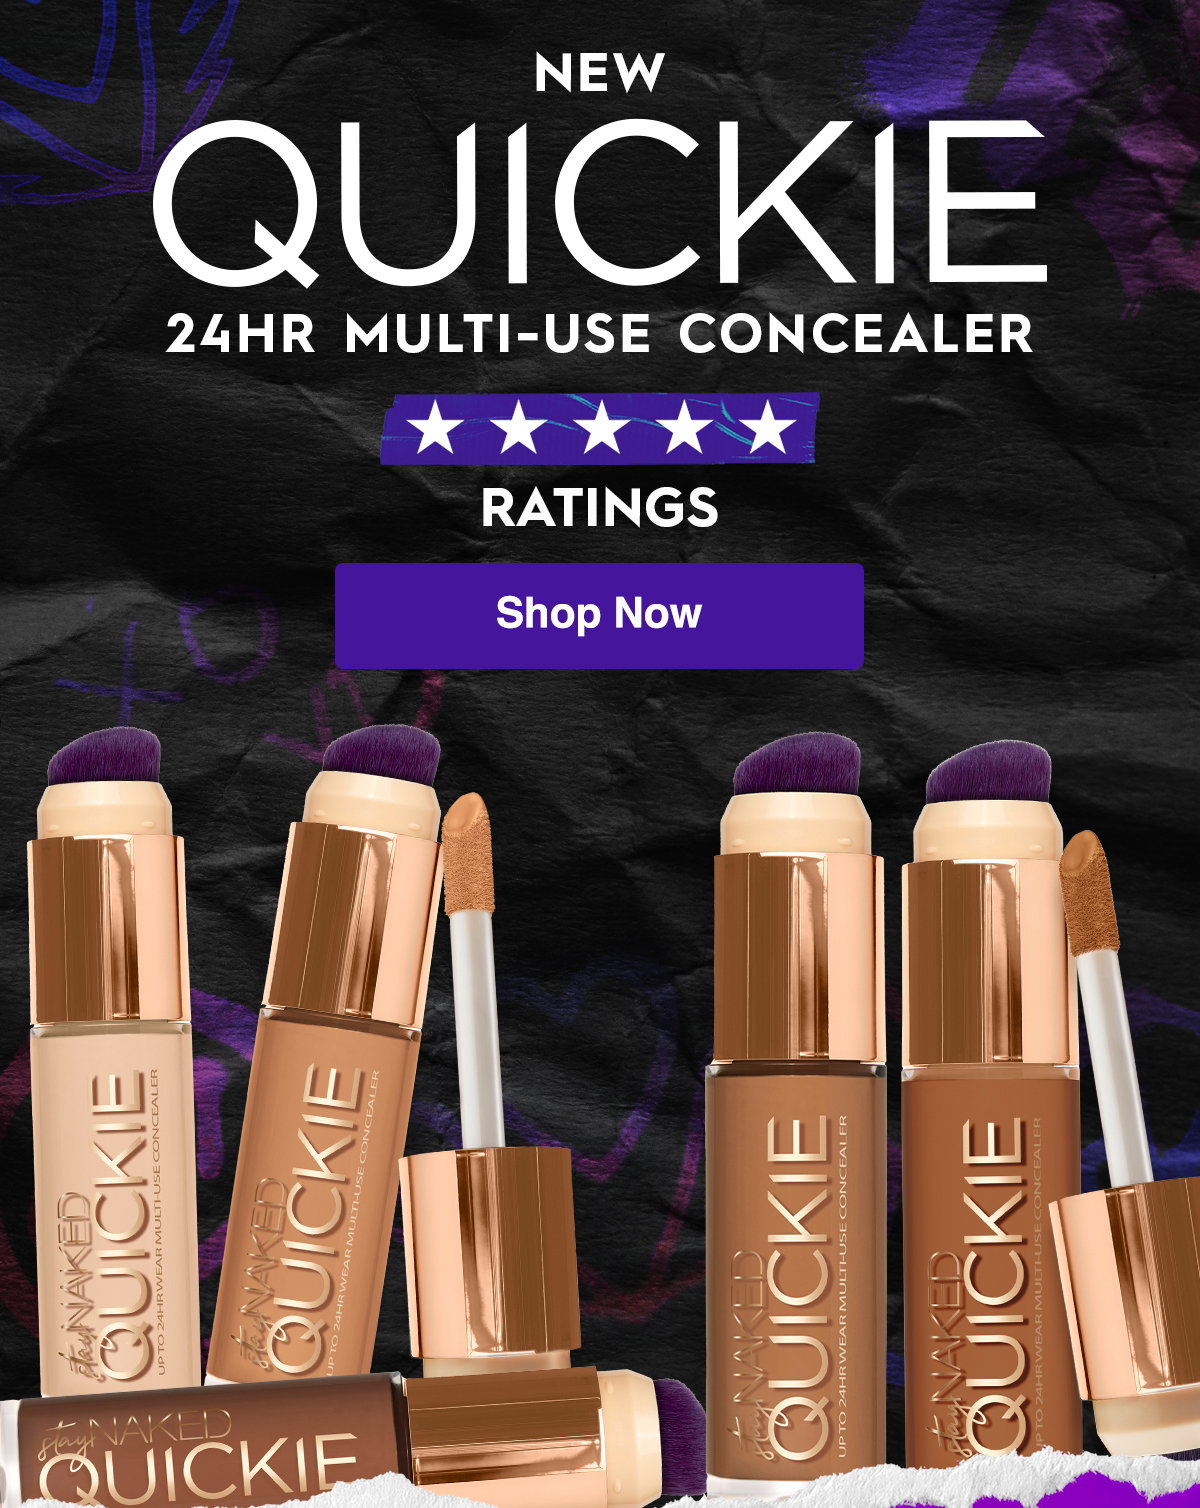 Don't Miss Your Chance To Get Urban Decay's Best-Selling Naked